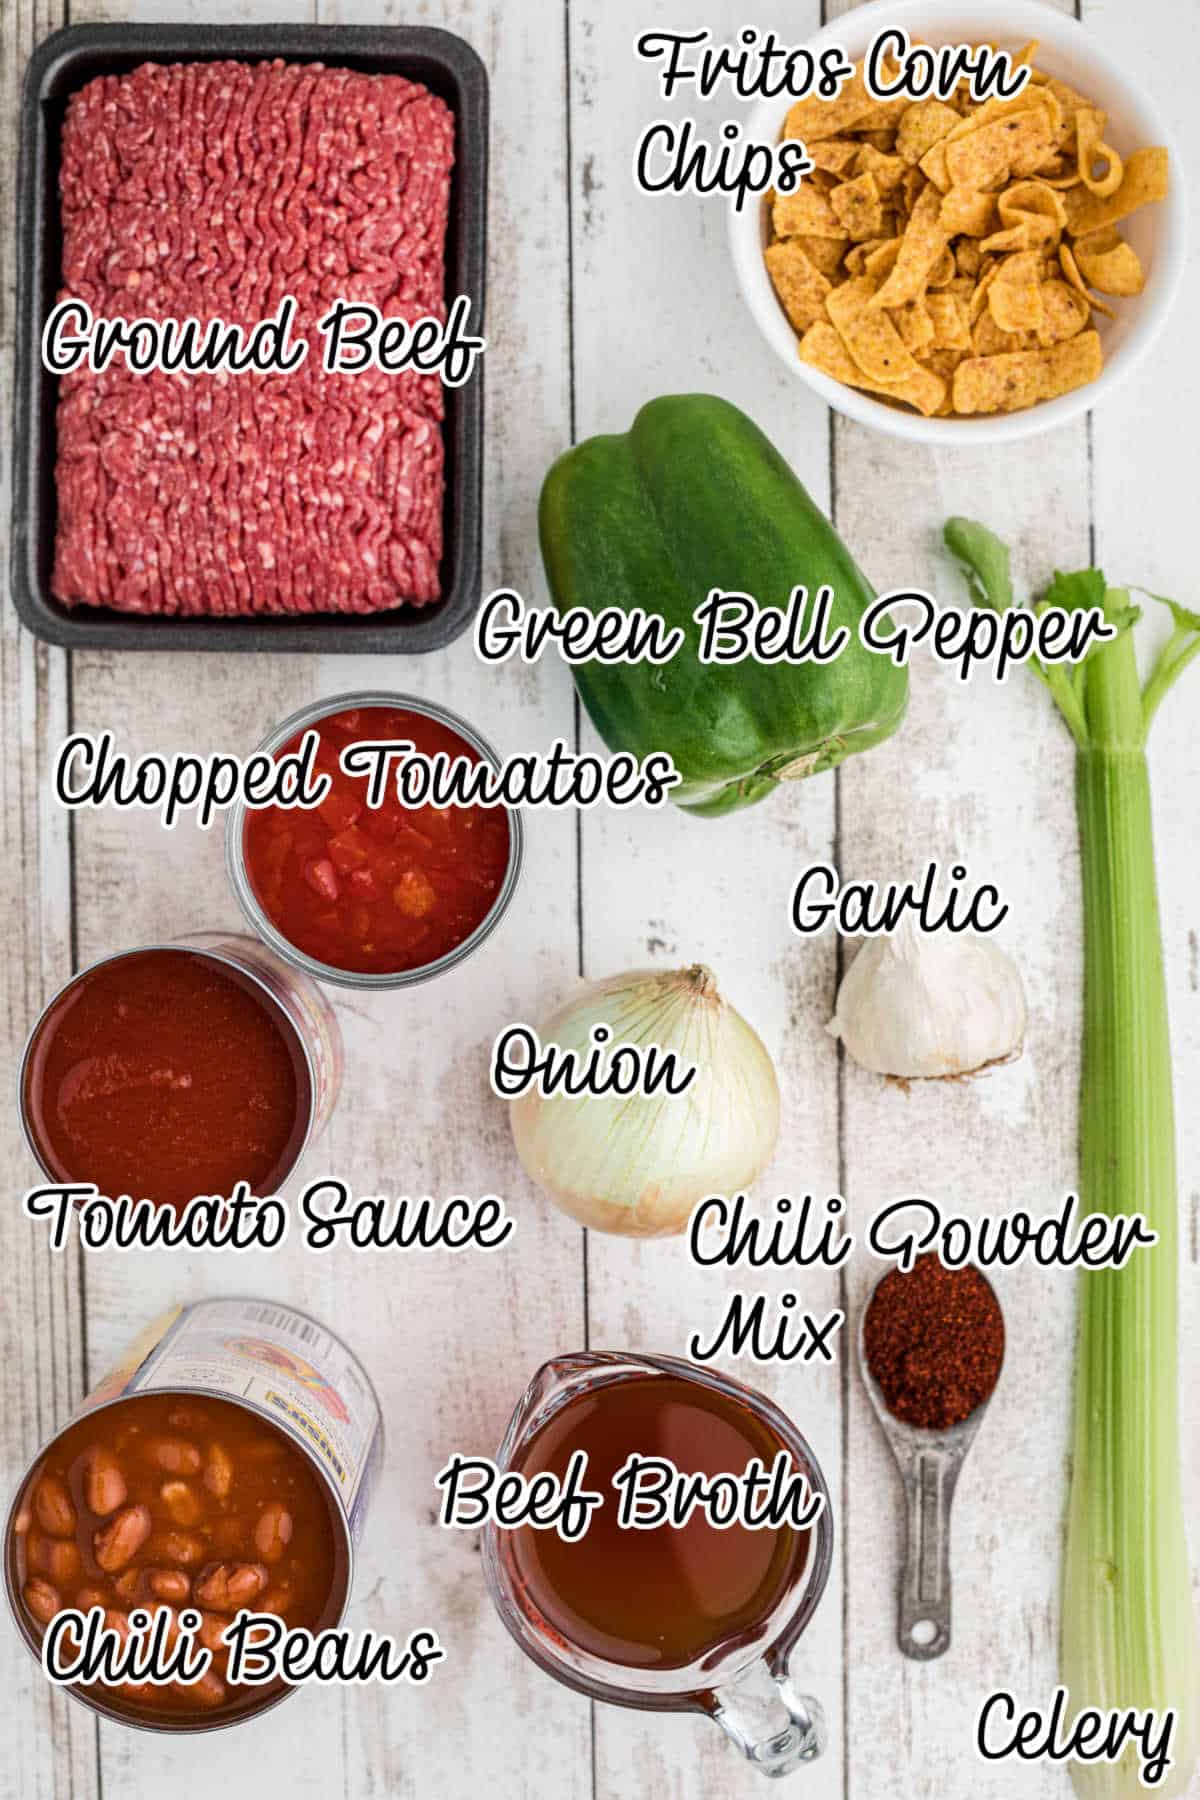 Ingredients laid out what is needed to make a crockpot frito pie.